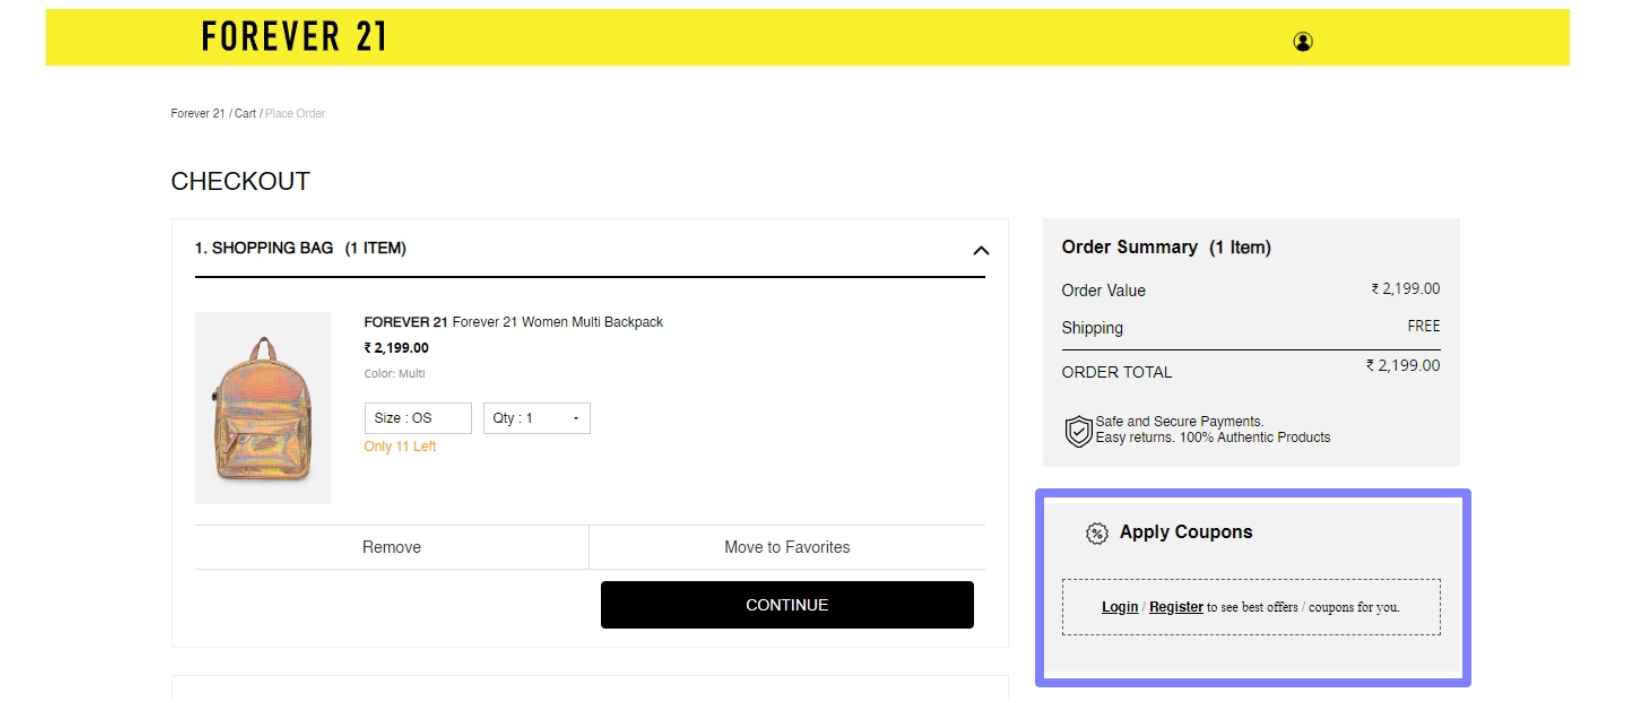 How to Use Forever21 Coupon Code